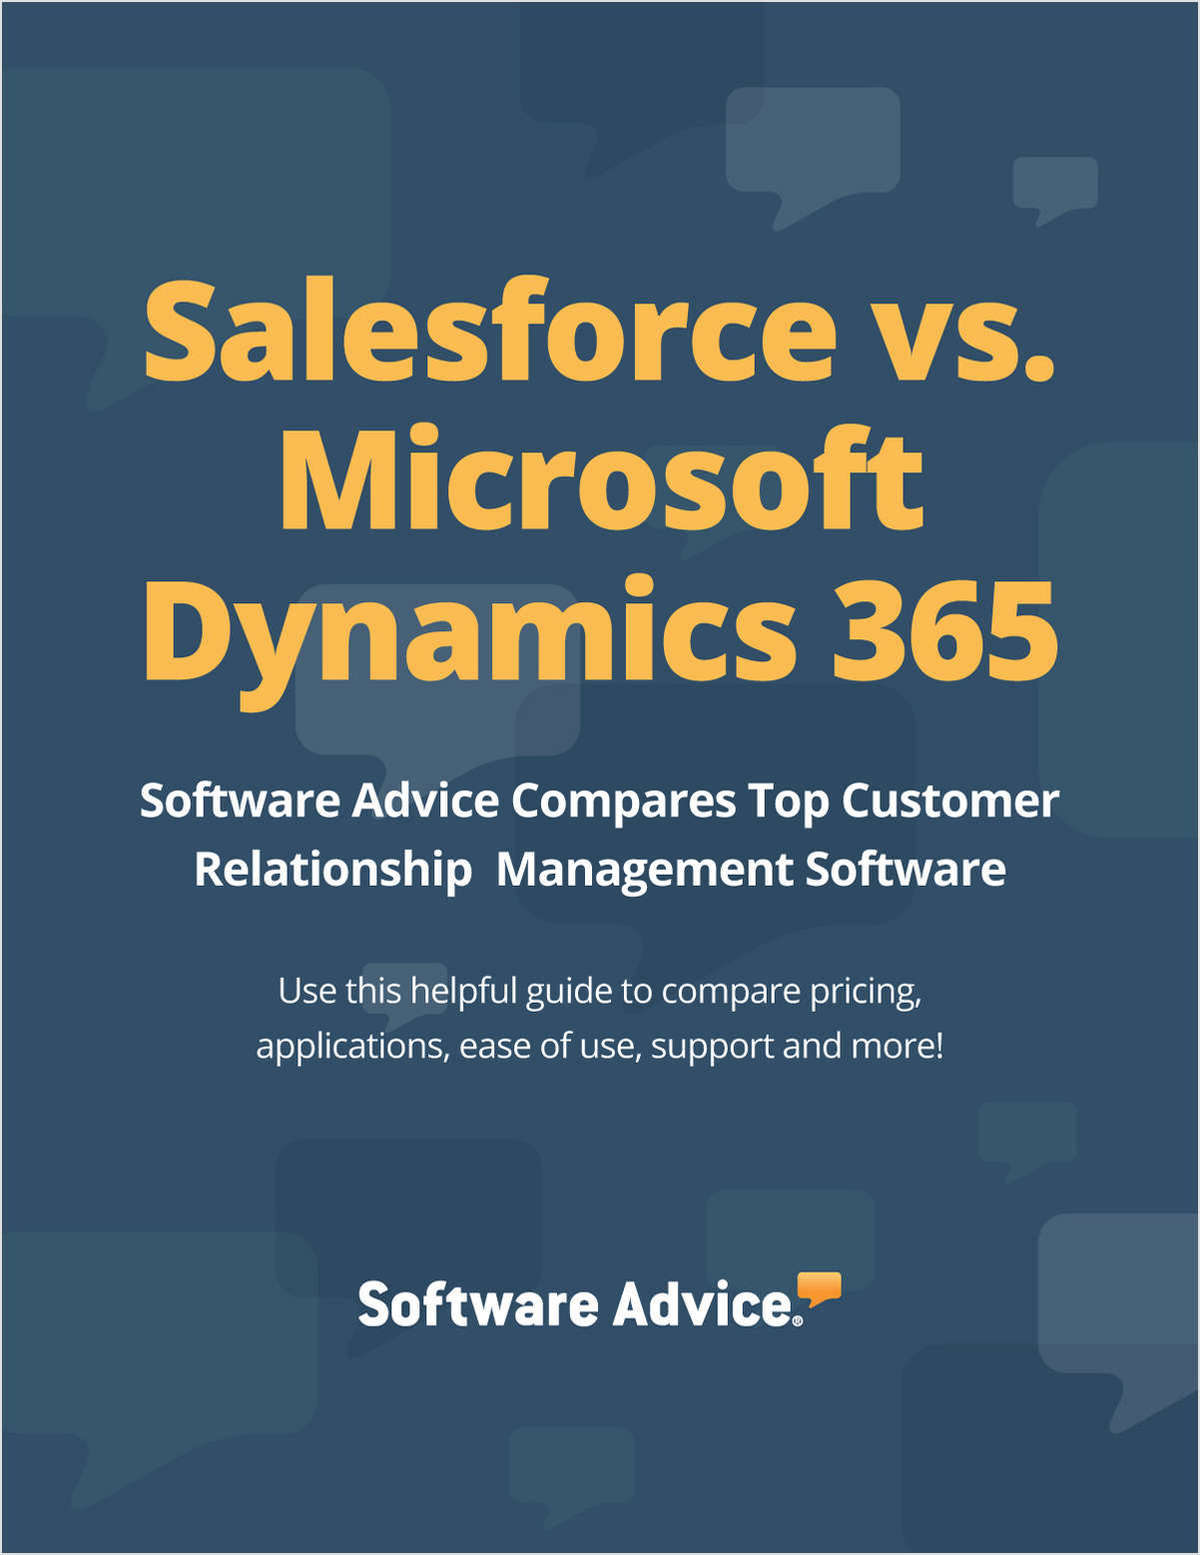 Salesforce vs. Microsoft Dynamics 365 - Compare Top Customer Relationship Management Software Systems